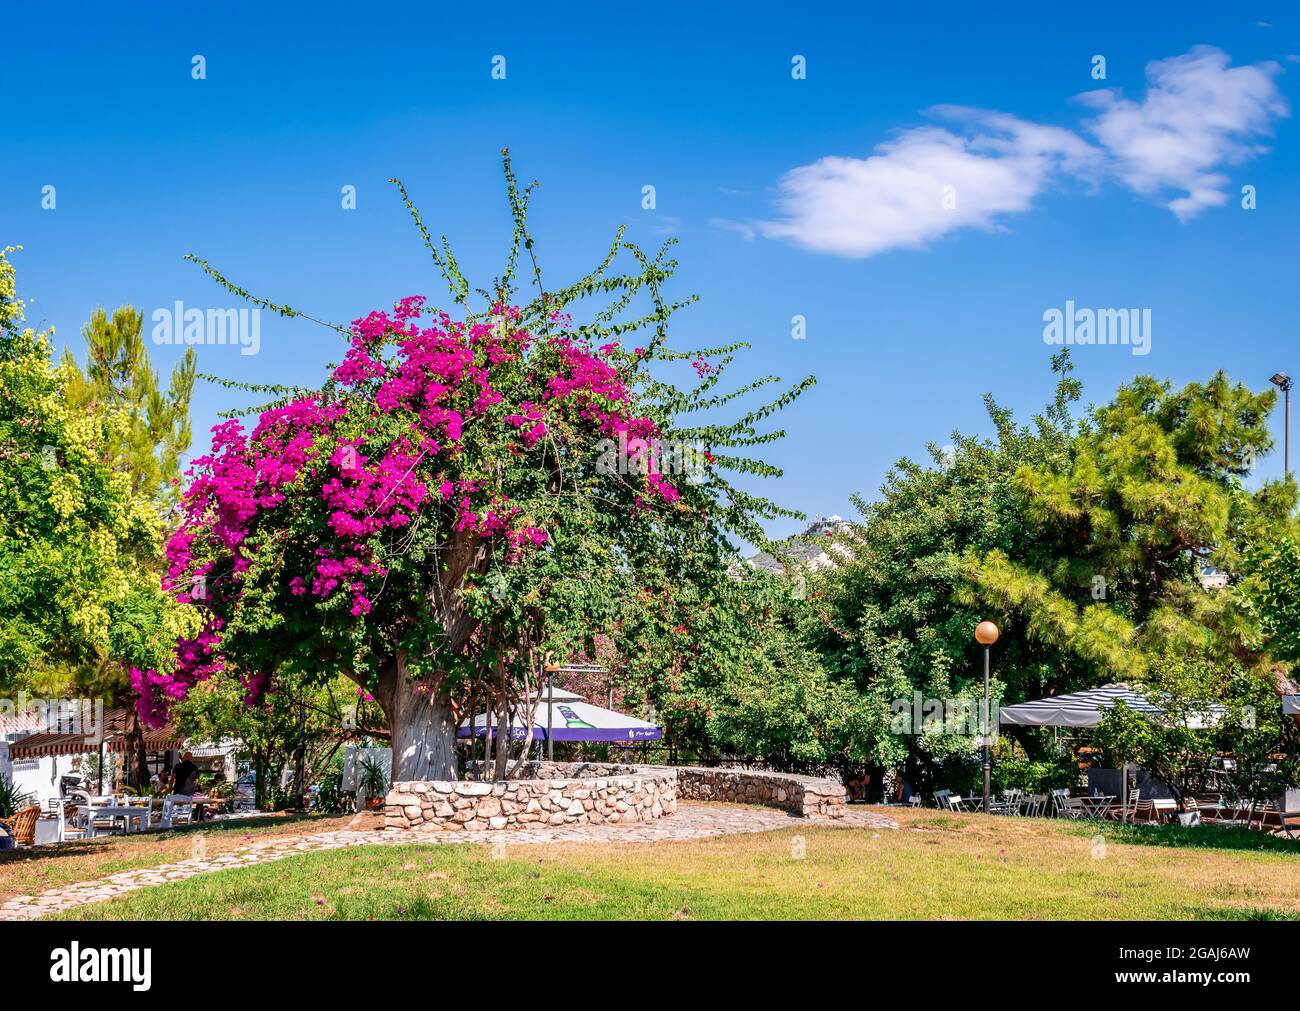 The Hiou and Vasilleos Alexandrou public park in Kaisariani, a suburb in the eastern part of Athens. Bloomed bougainvillea. Stock Photo